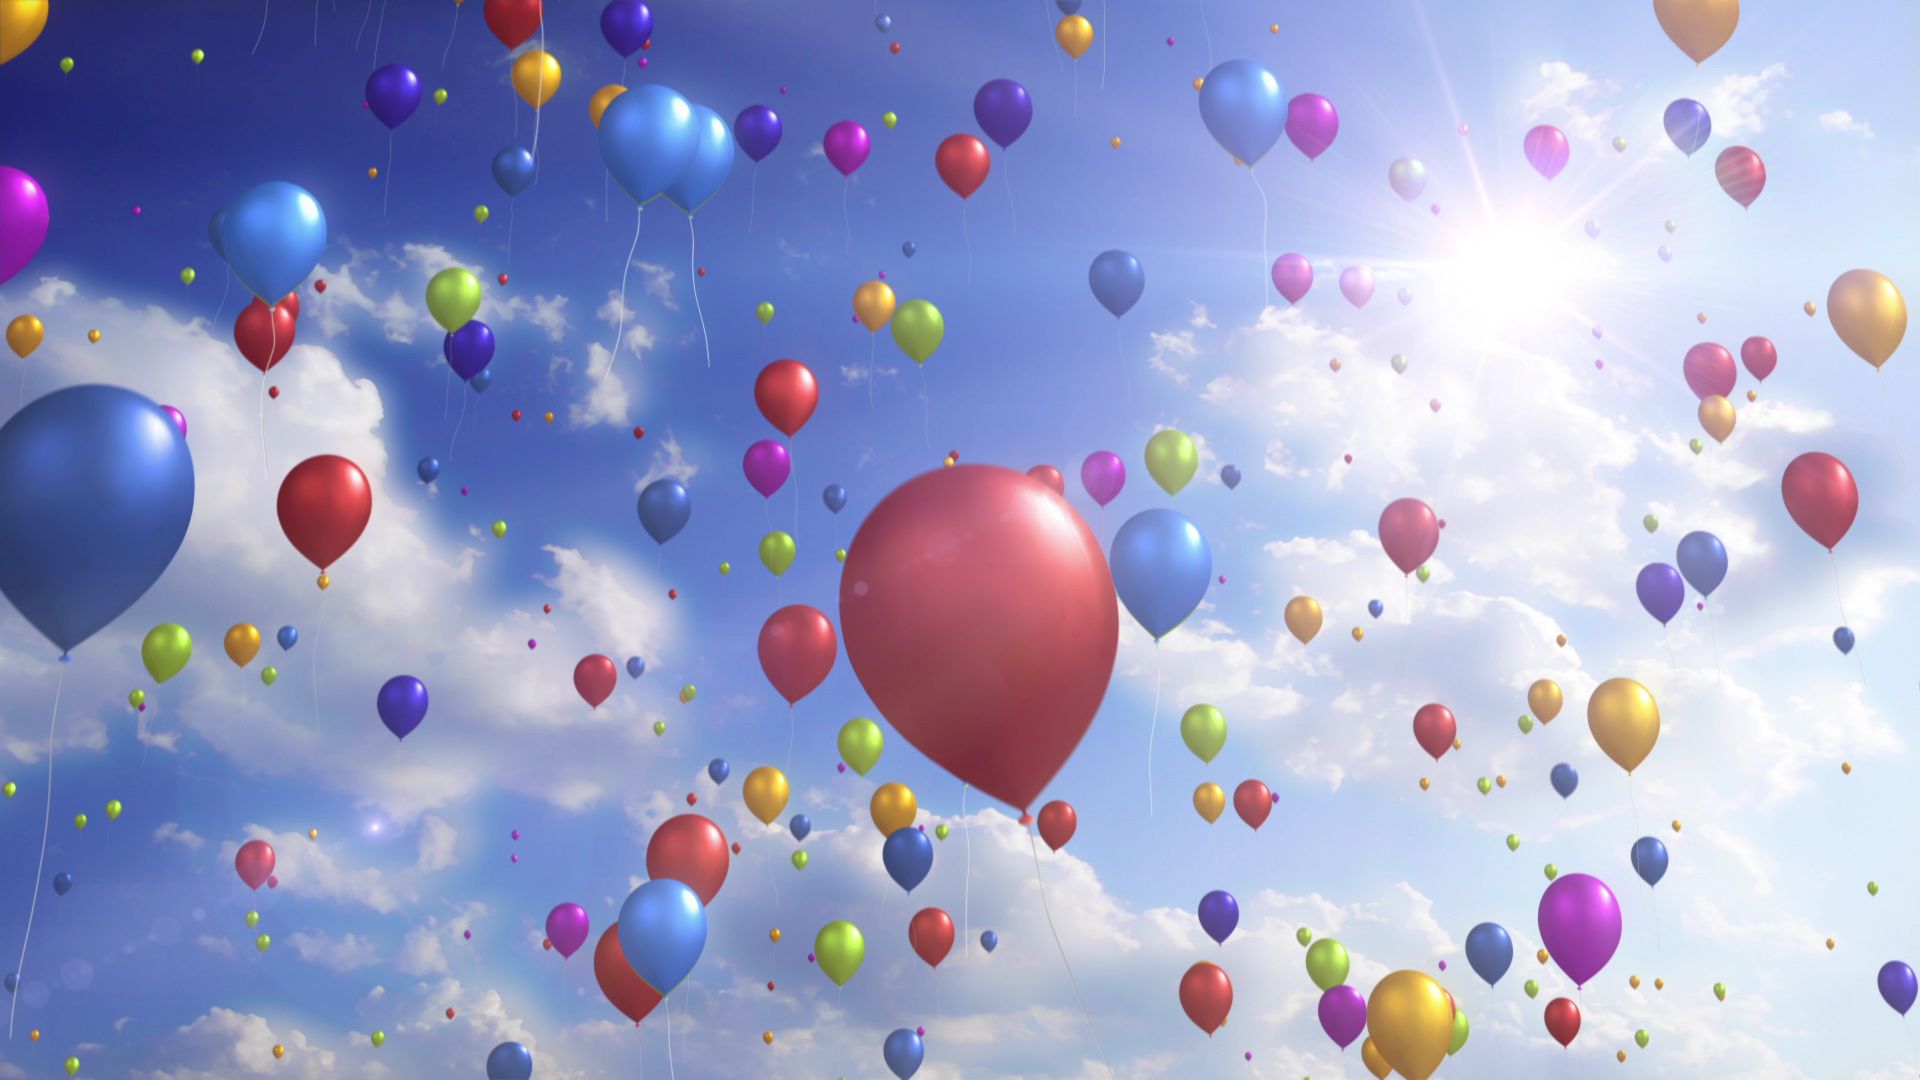 ColorfulBalloons-Festive_And_Party_Motion_Background_Video_Loop_Sample3.jpg